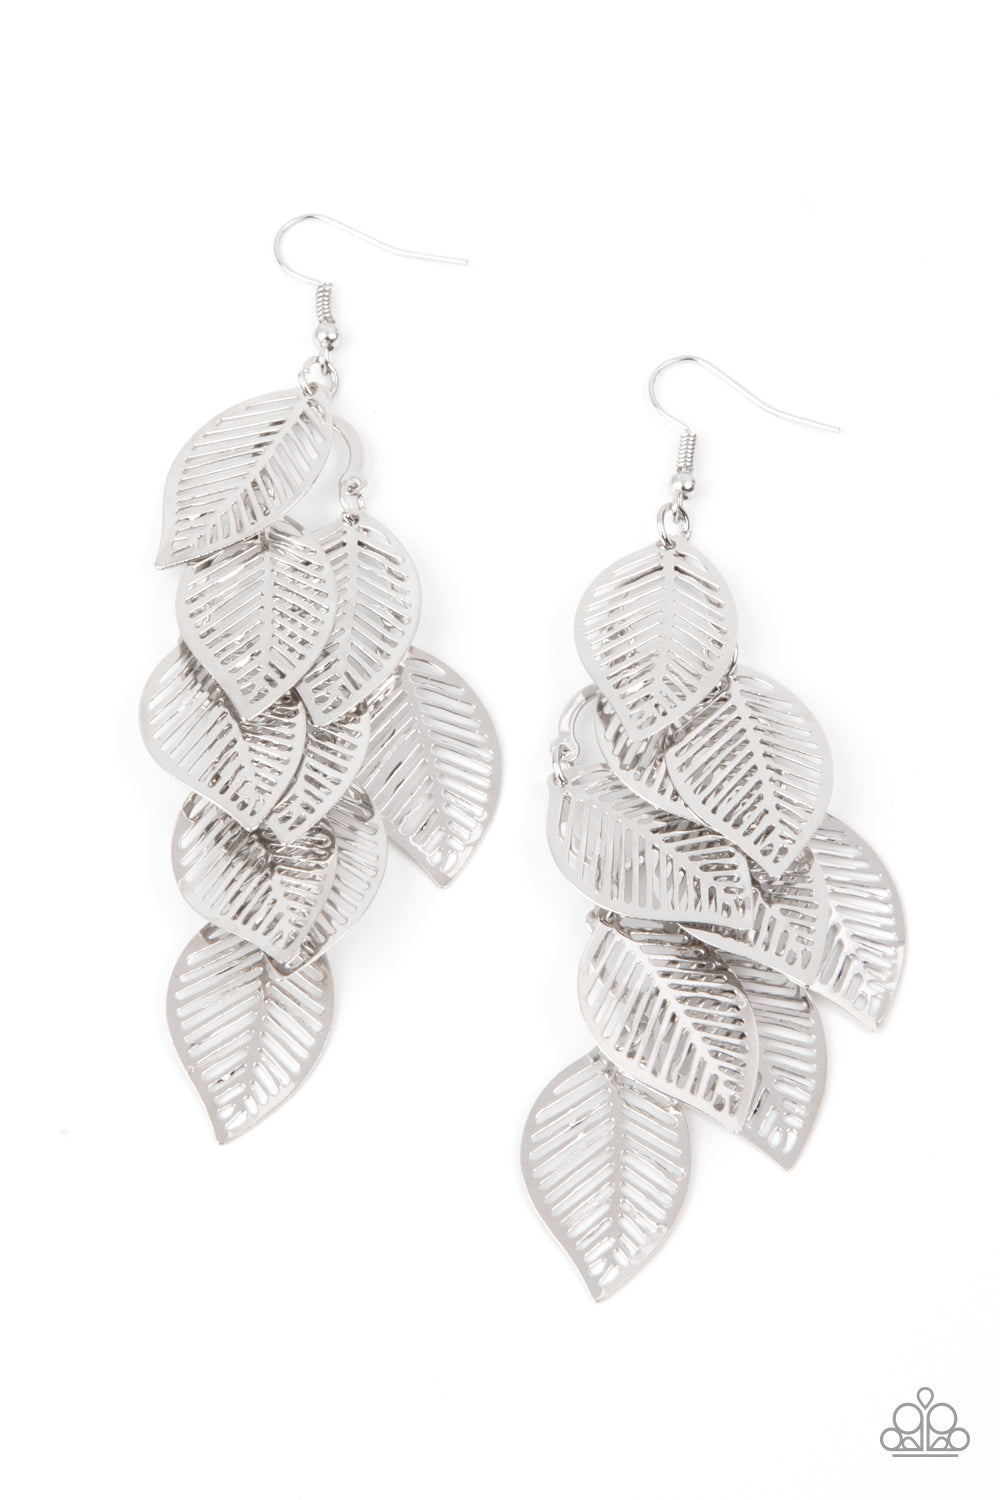 Paparazzi Accessories - Limitlessly Leafy #E429 - Silver Earrings